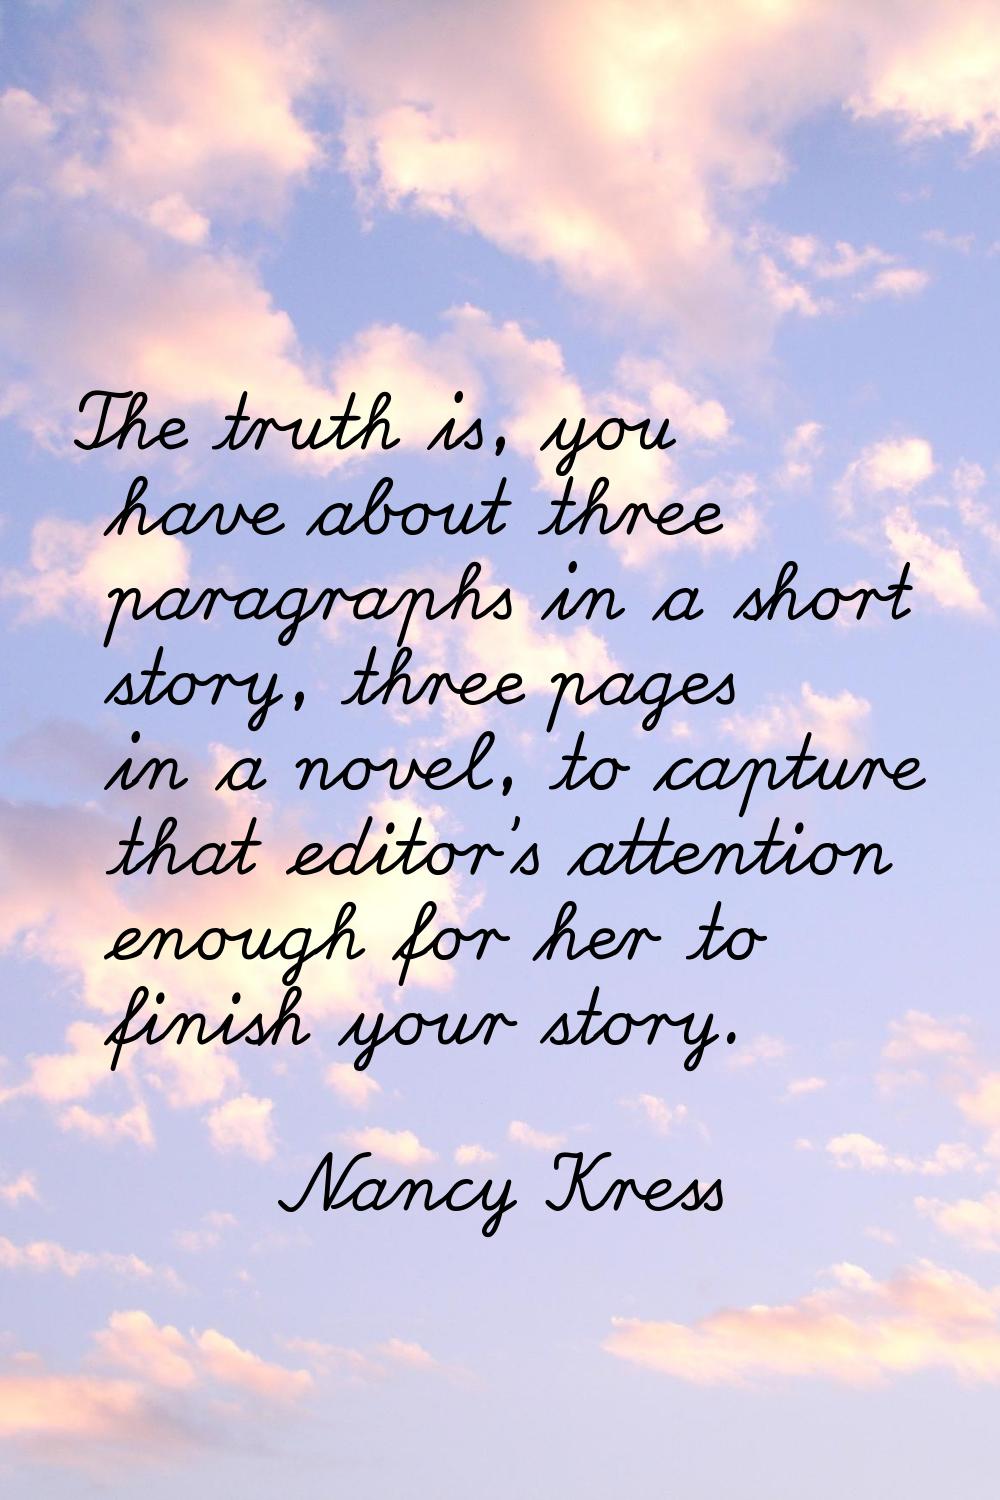 The truth is, you have about three paragraphs in a short story, three pages in a novel, to capture 